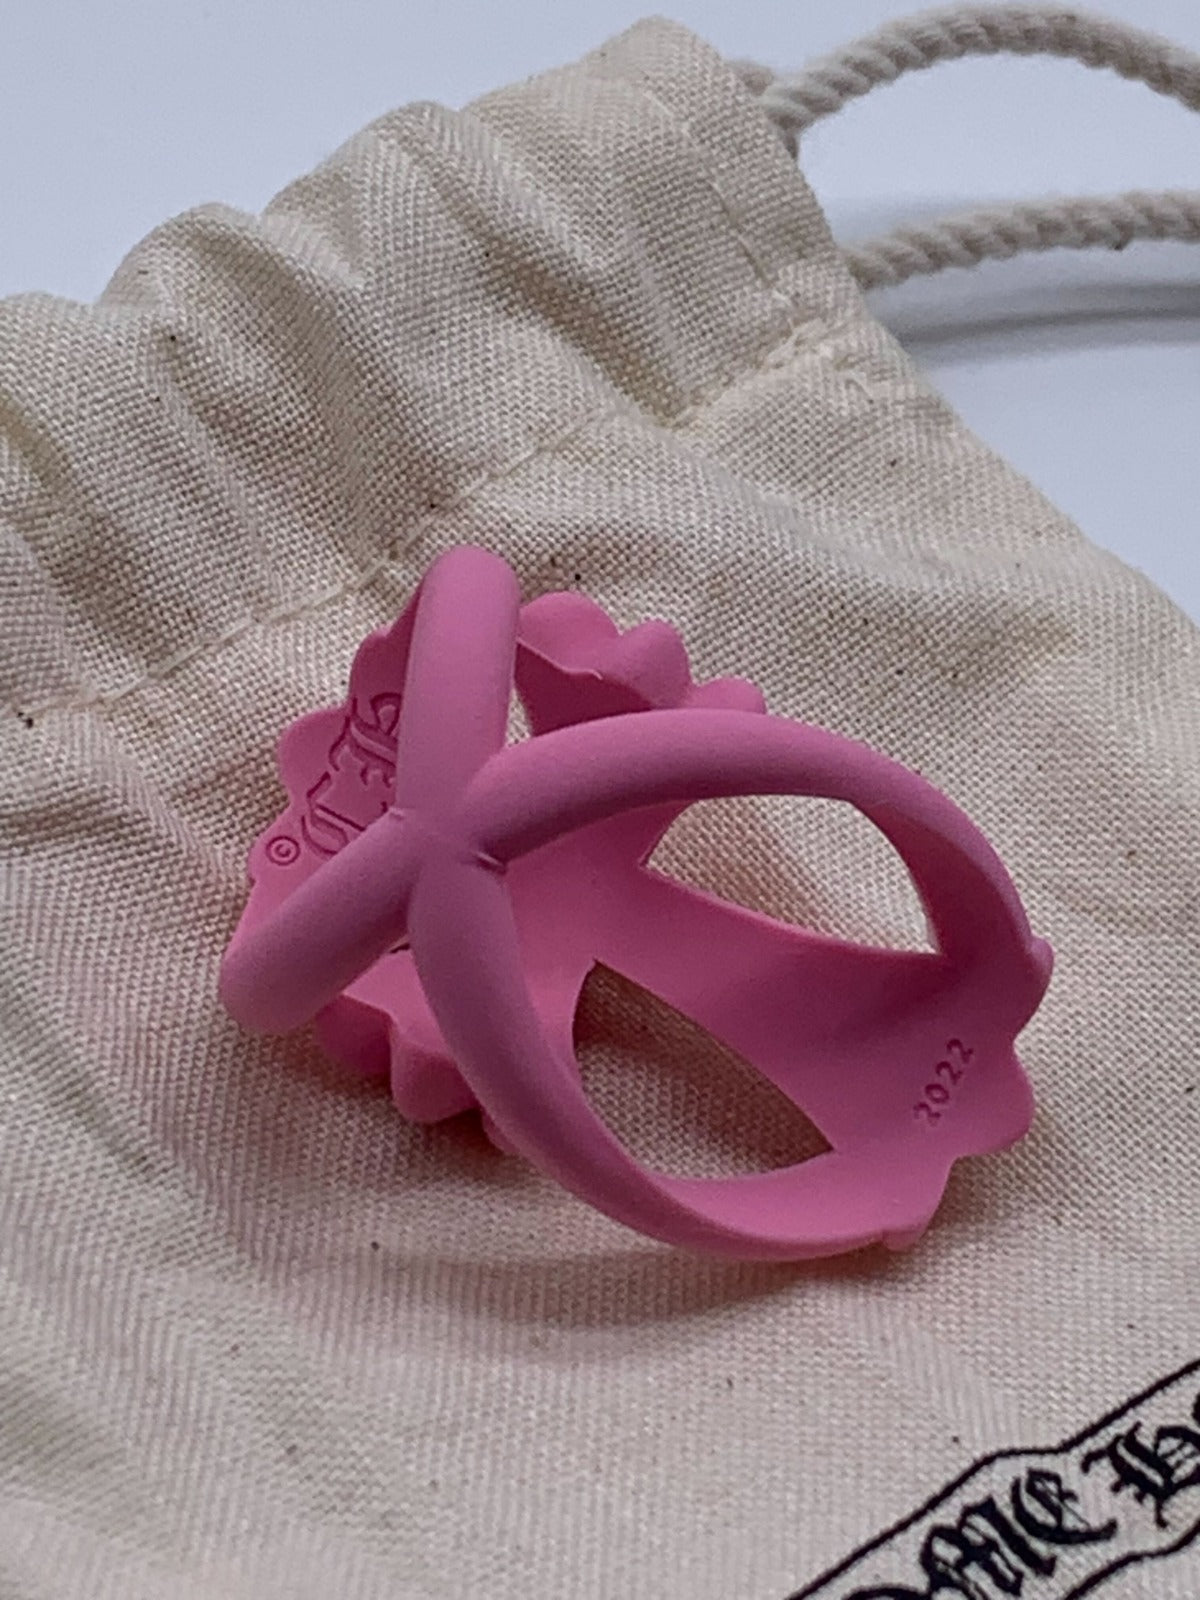 Chrome Hearts Silicone Cross Ring (Pink)